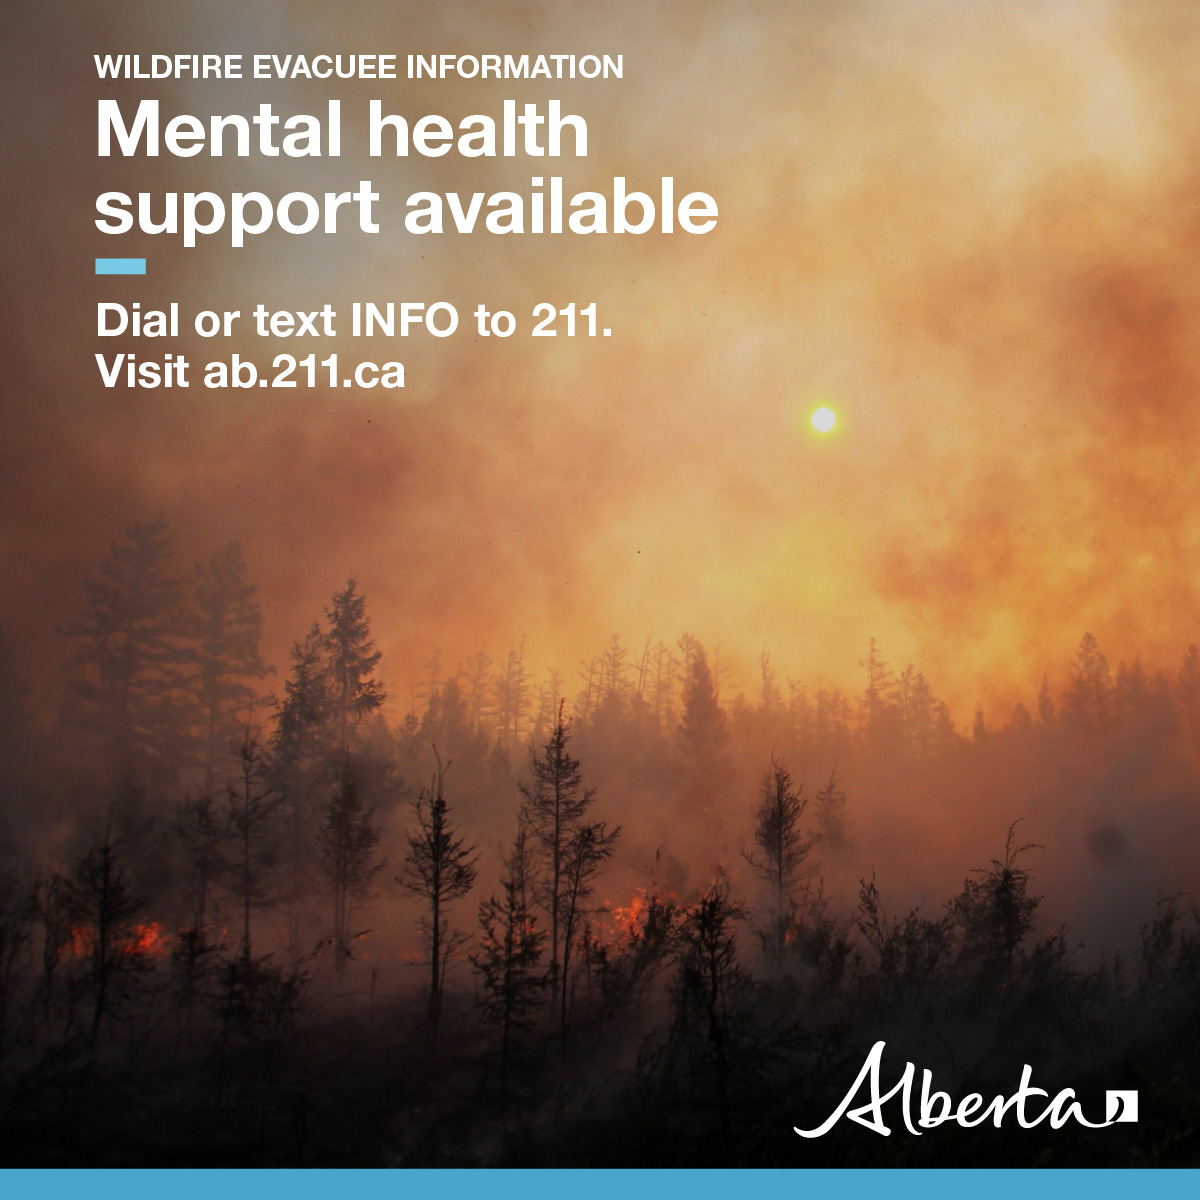 For those impacted by #ABWildfire, mental health support is available. Reach out for digital support or find nearby services by texting INFO to 211 or visit ab.211.ca You can also connect with counseling services at 1-833-827-4230 or visit counsellingalberta.com